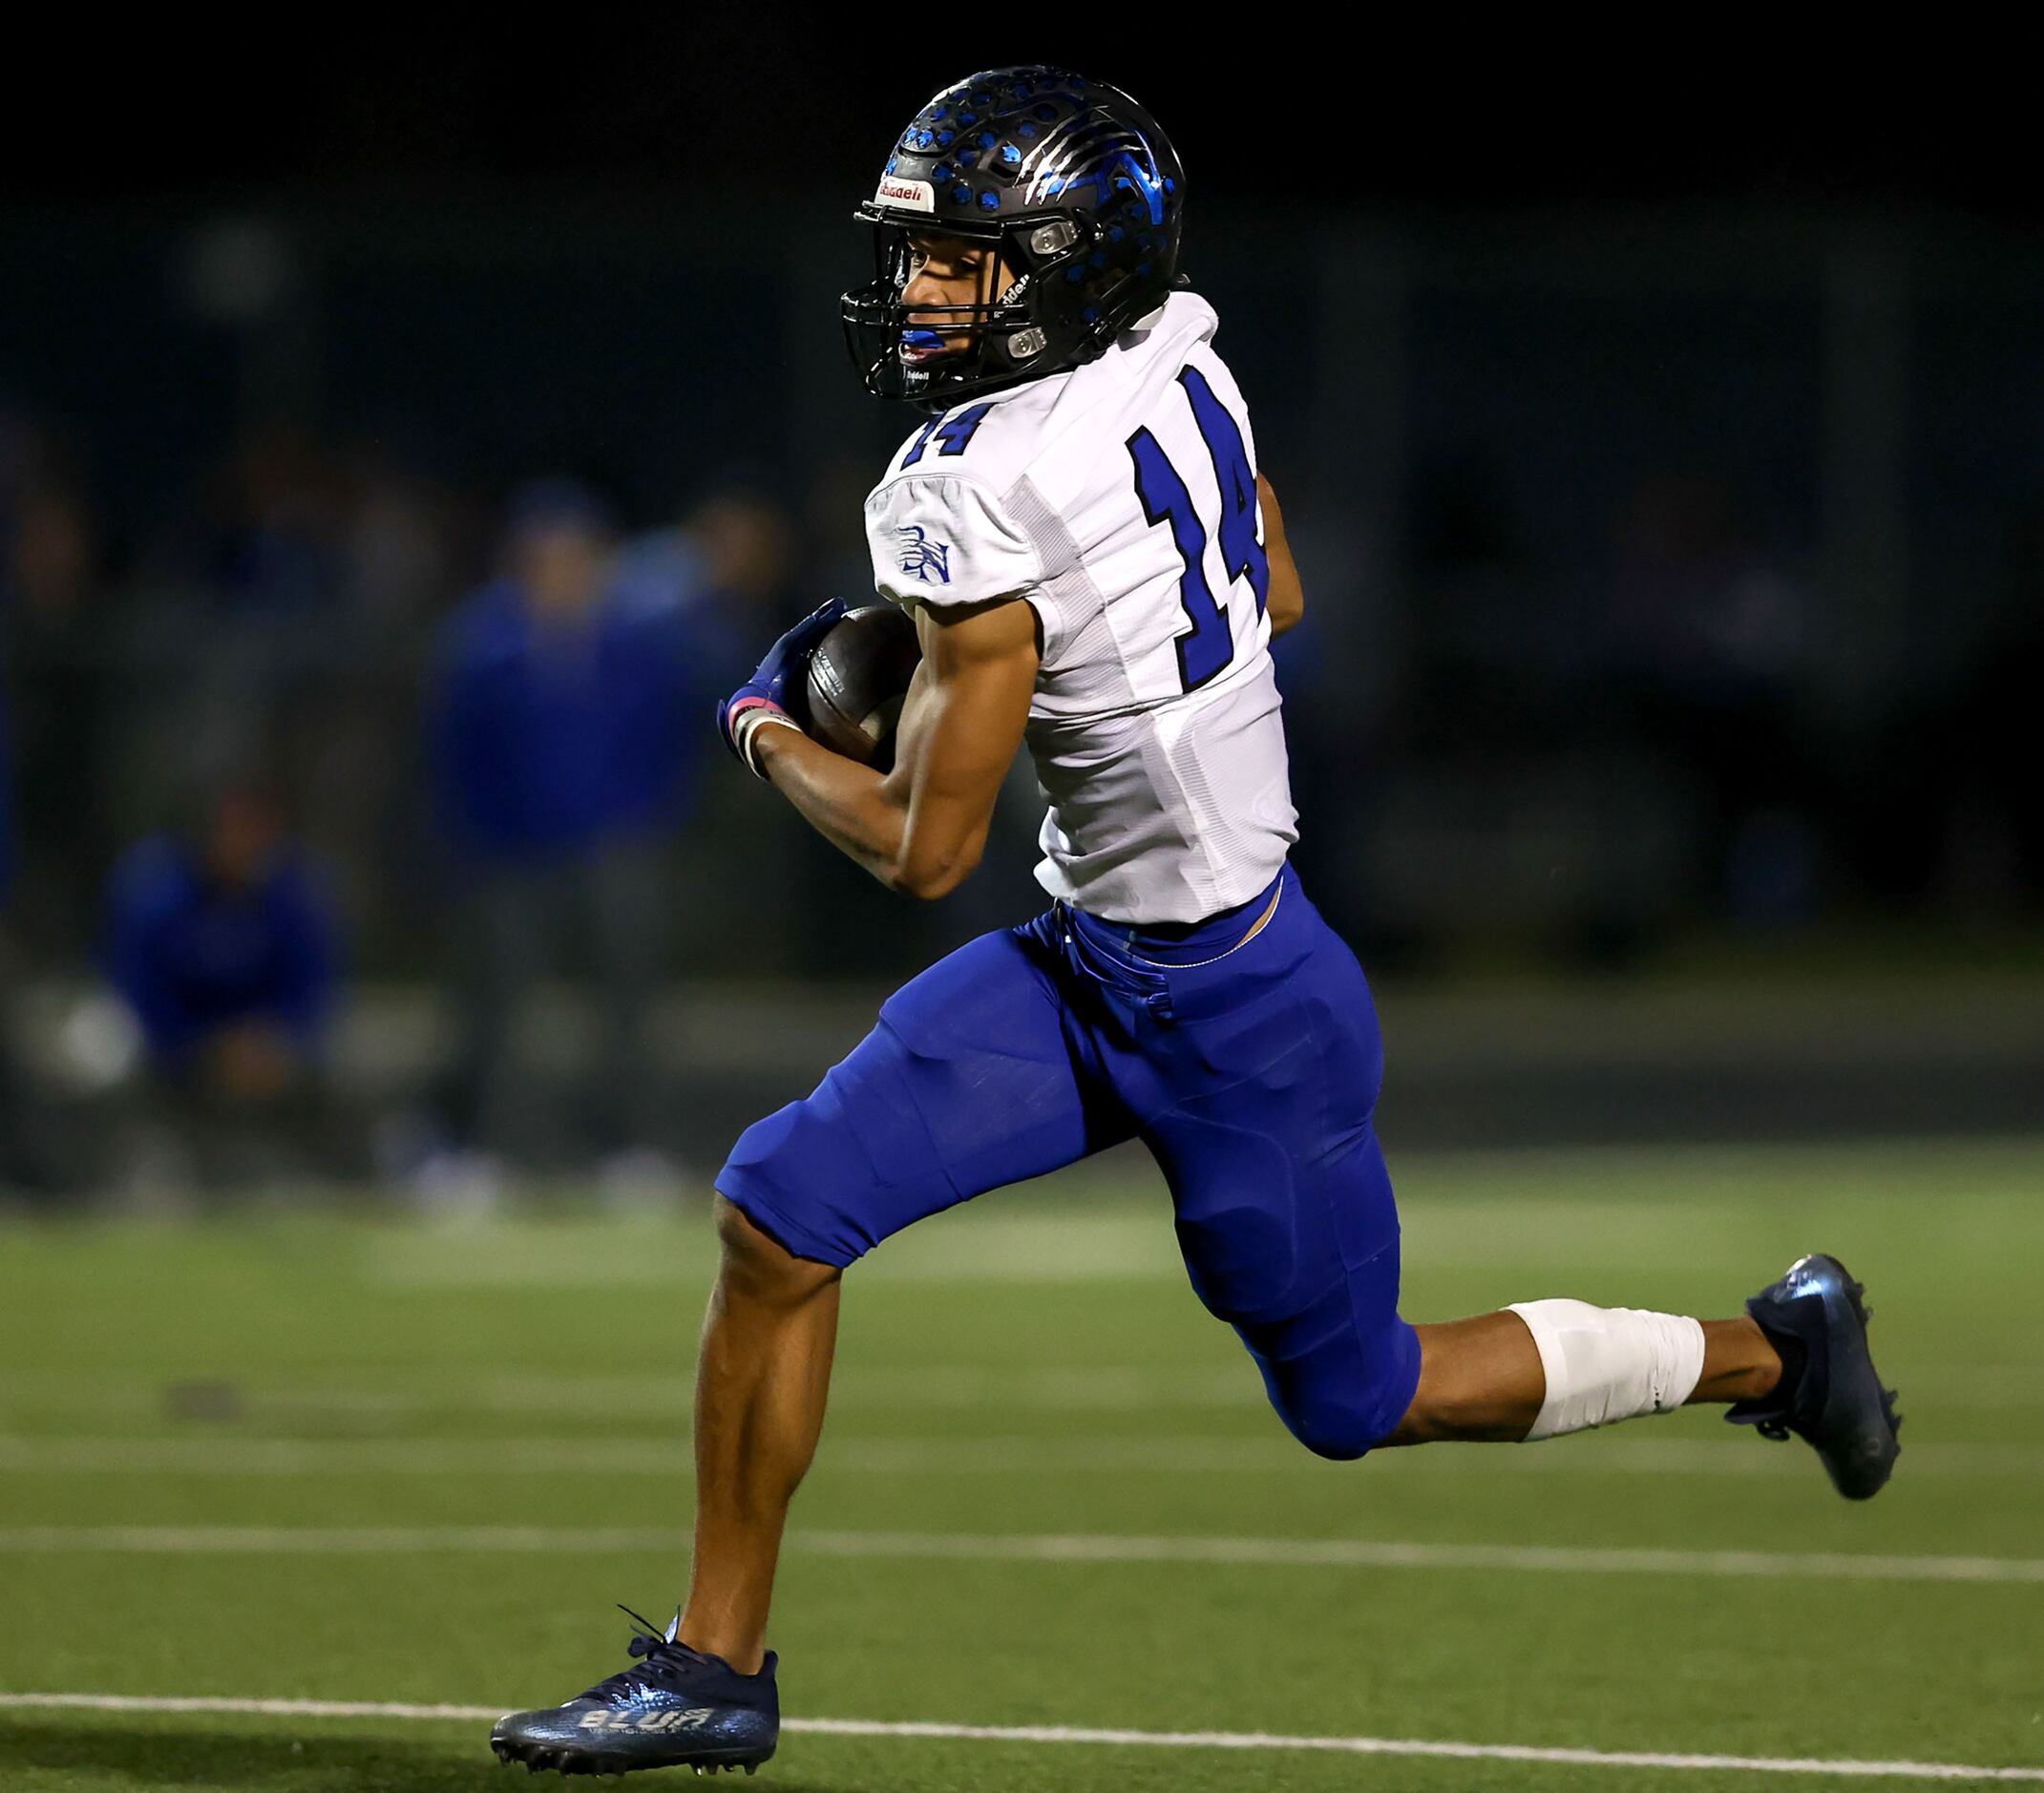 Byron Nelson wide receiver Landon Ransom-Goelz goes 45 yards for a touchdown reception...